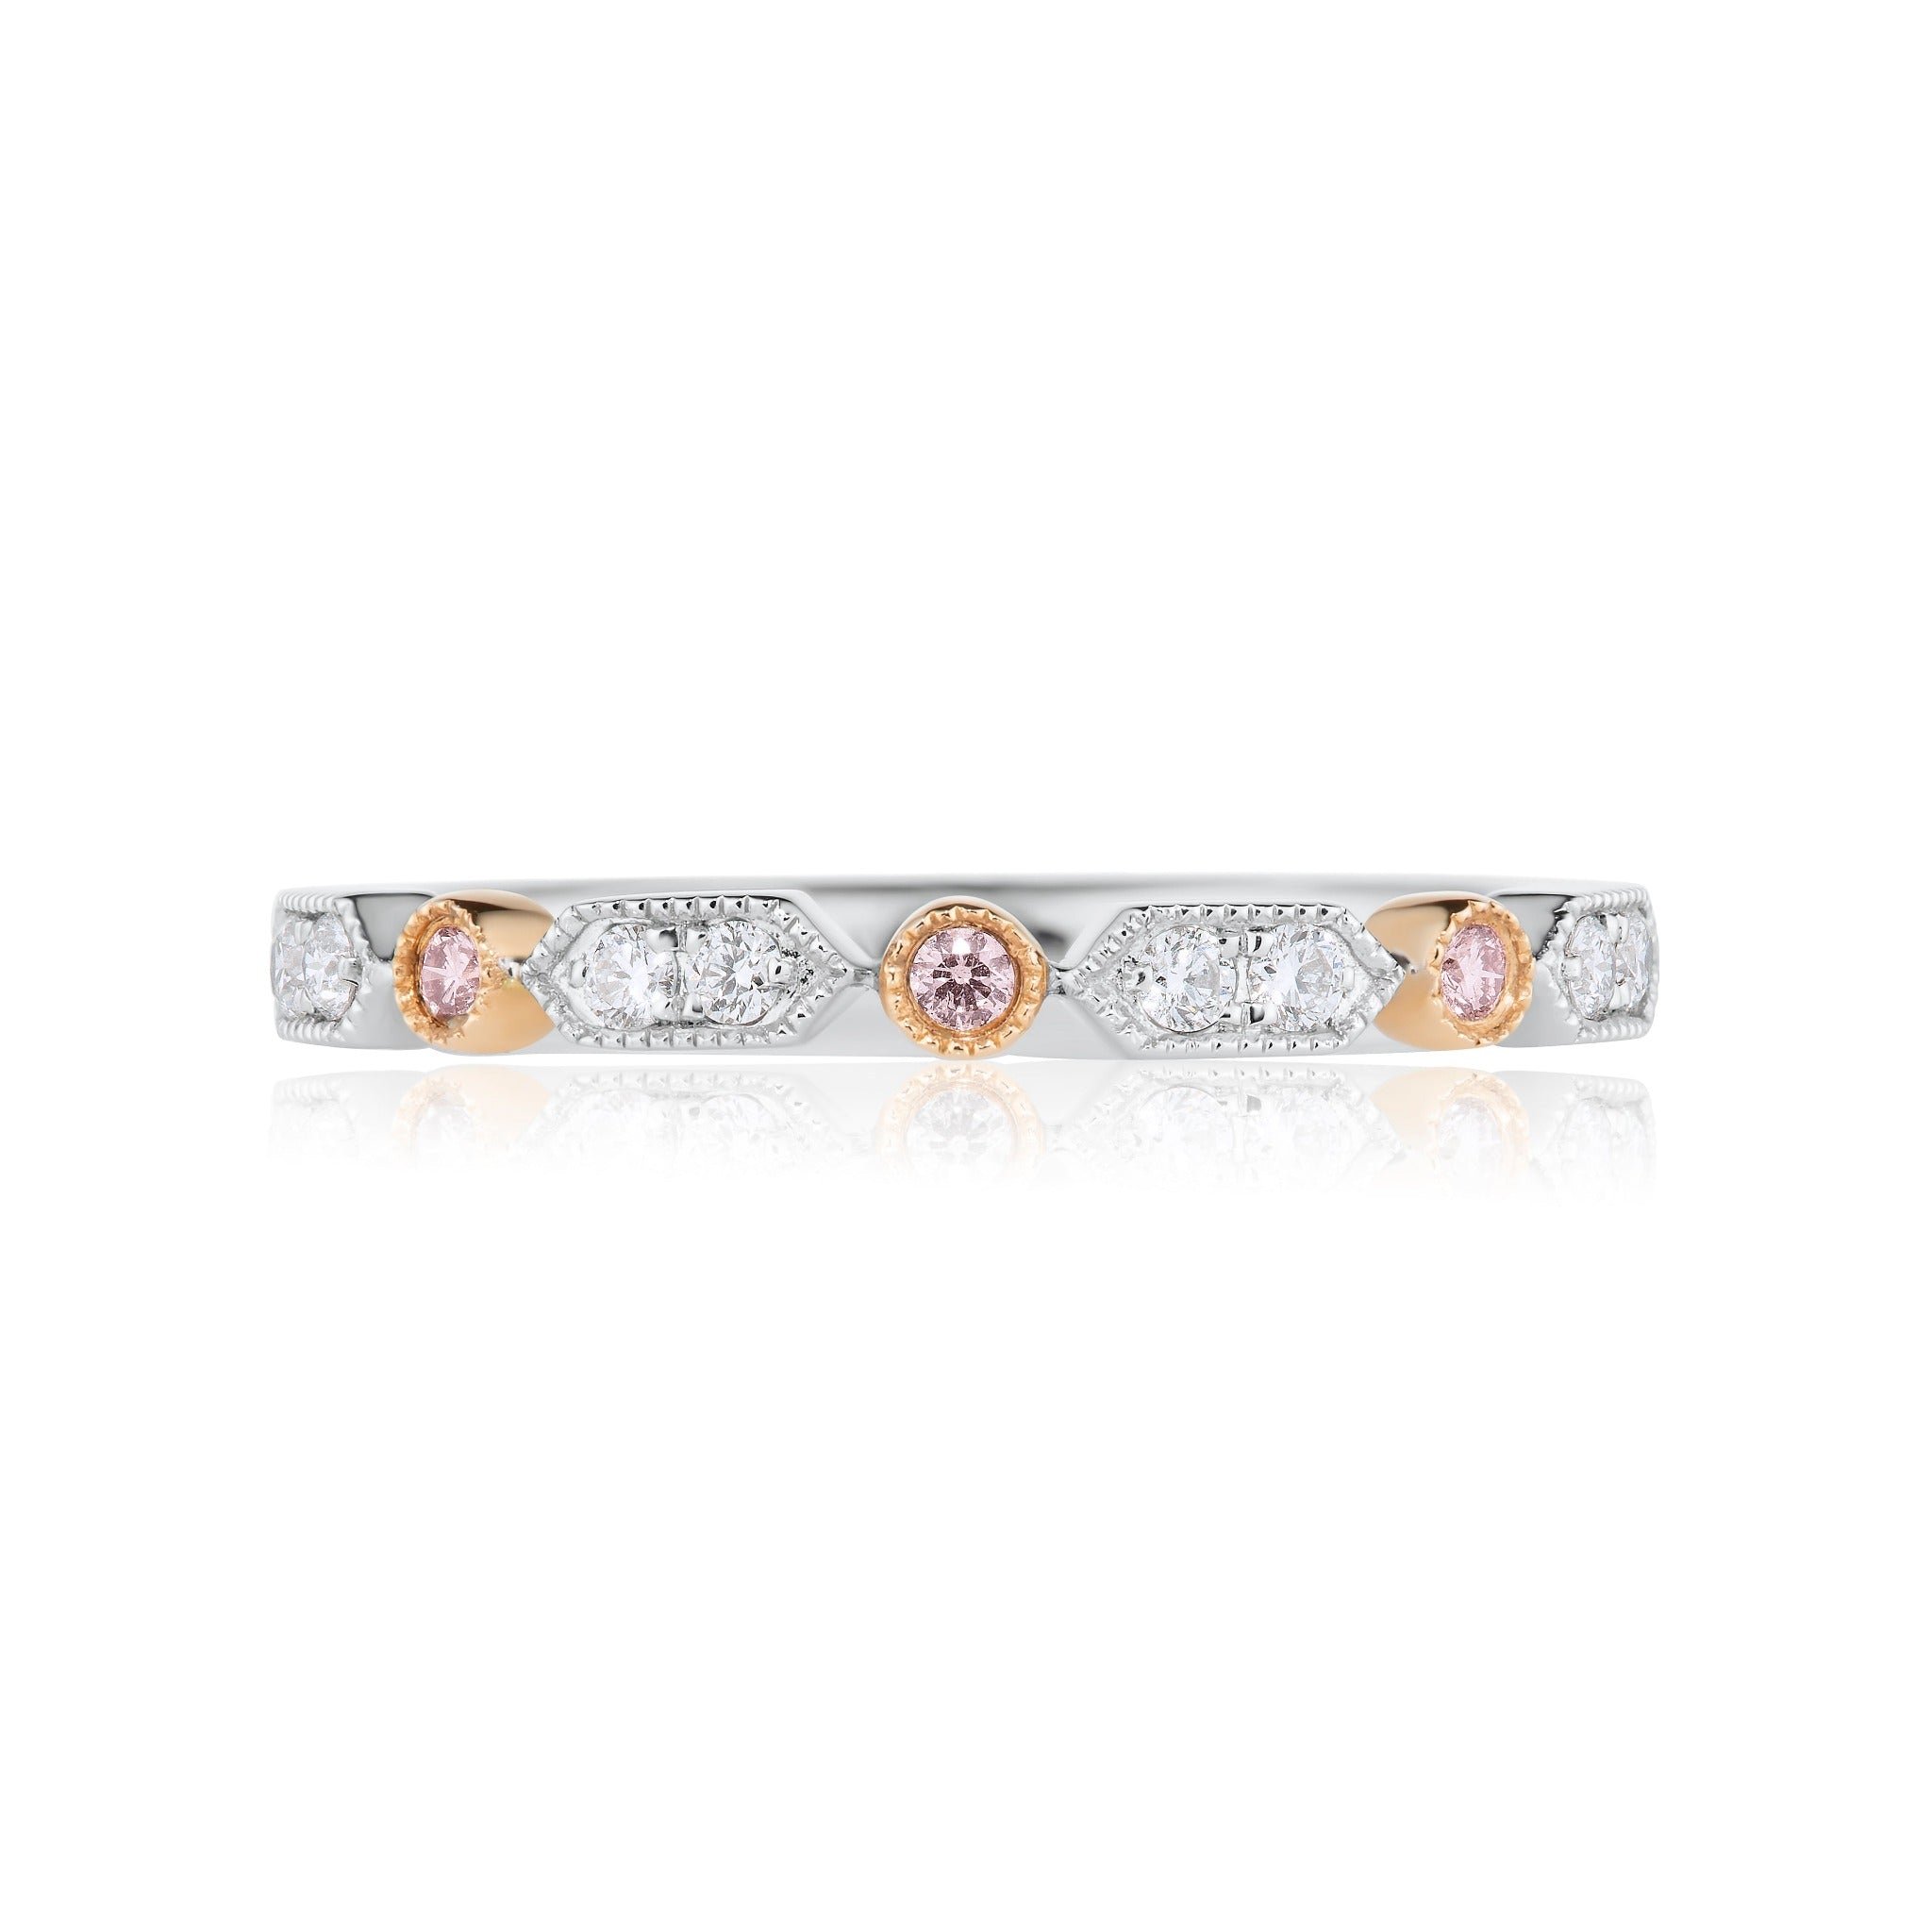 Fancy Victorian Style Pink & White Diamond Ring